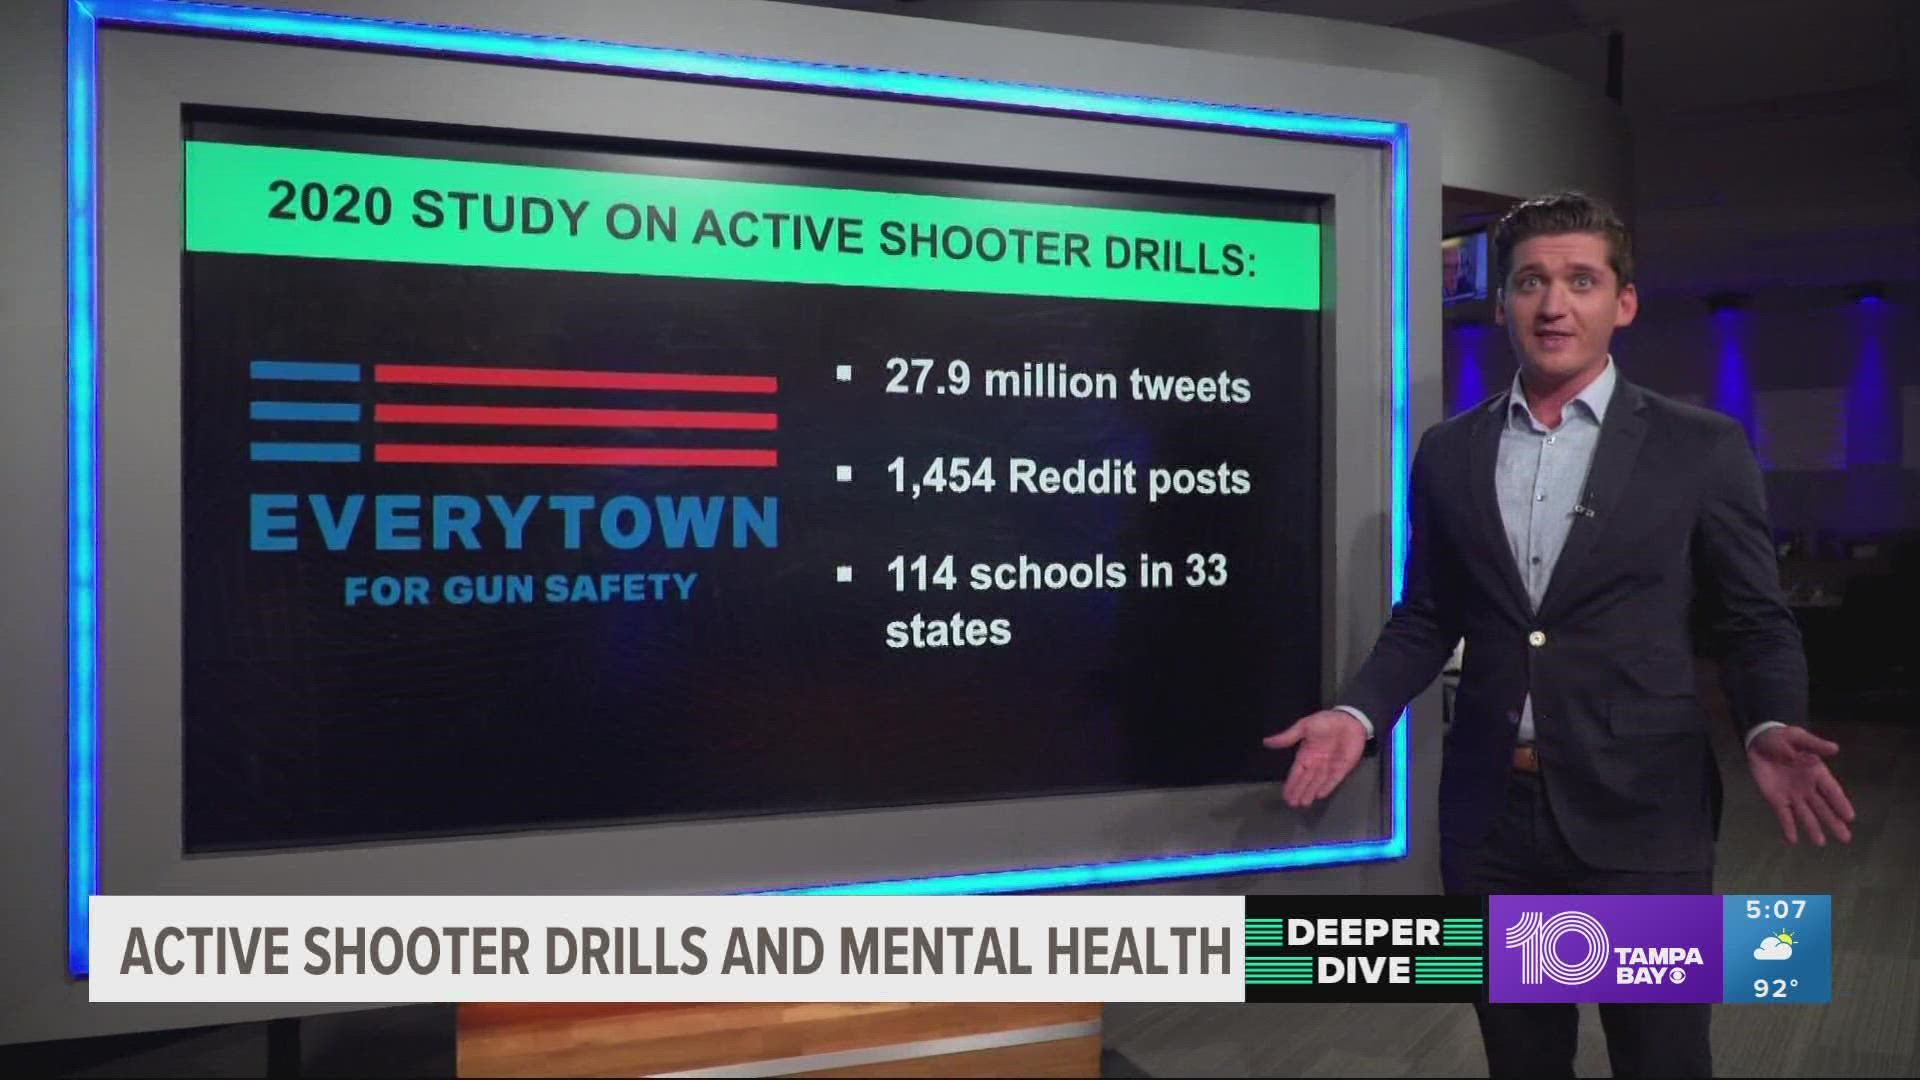 Active shooter drills have become the norm in many states across the country, but do they do more harm than good?